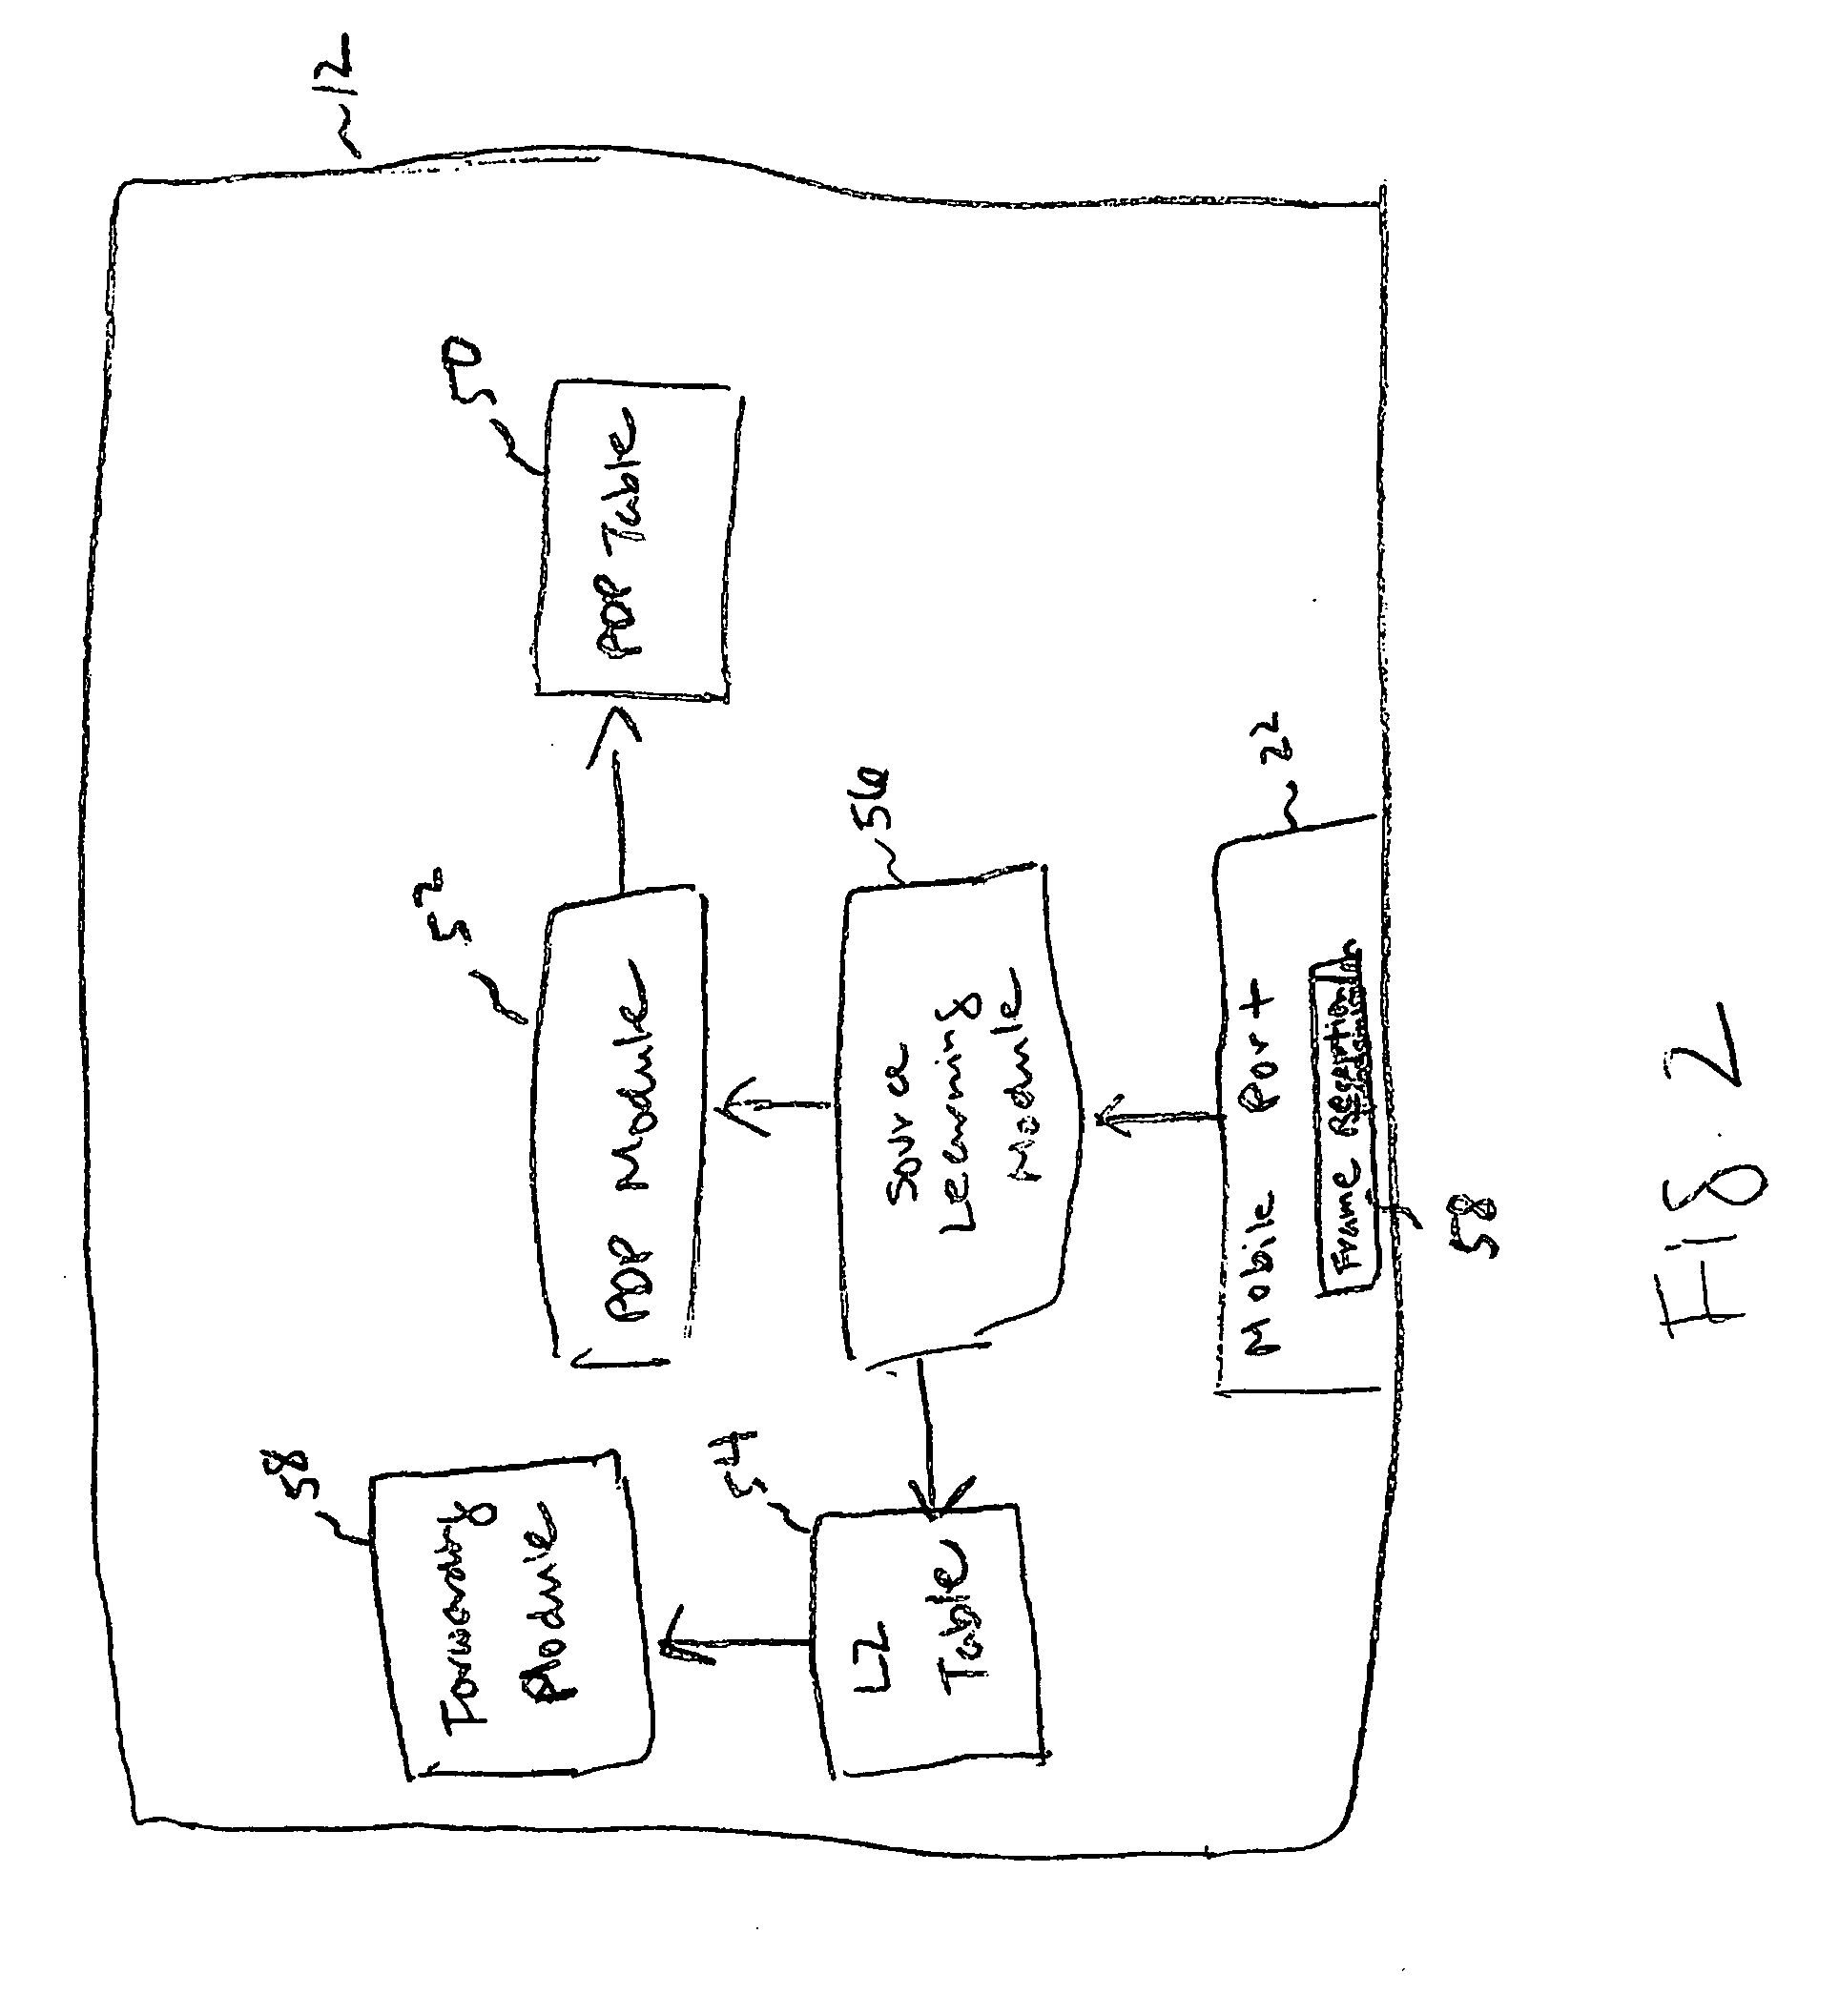 Printer discovery protocol system and method